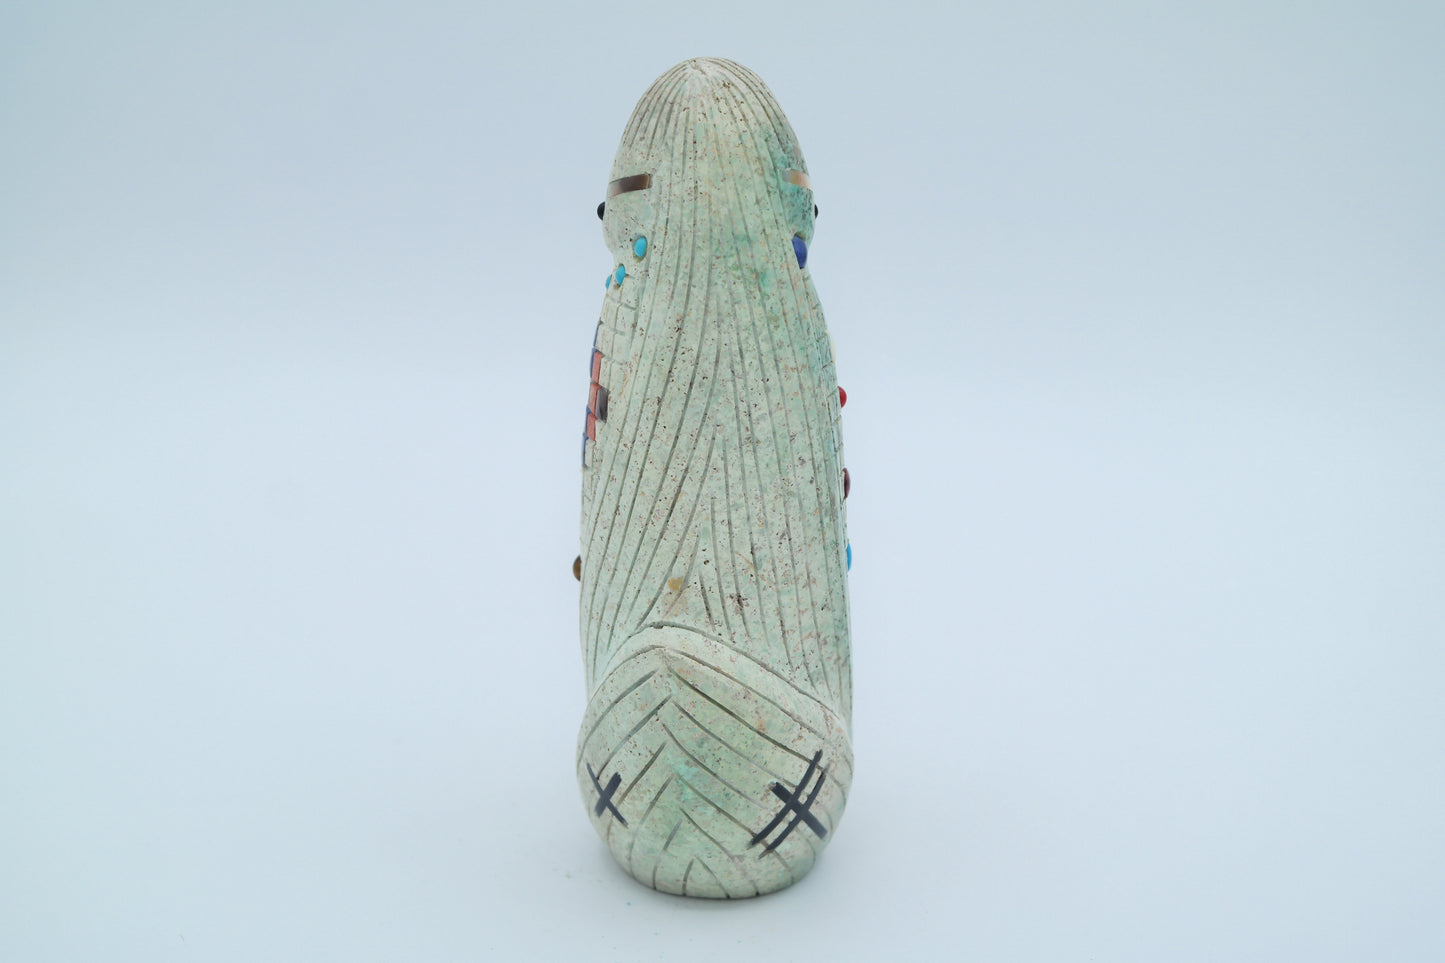 Turquoise Corn Maiden Carving